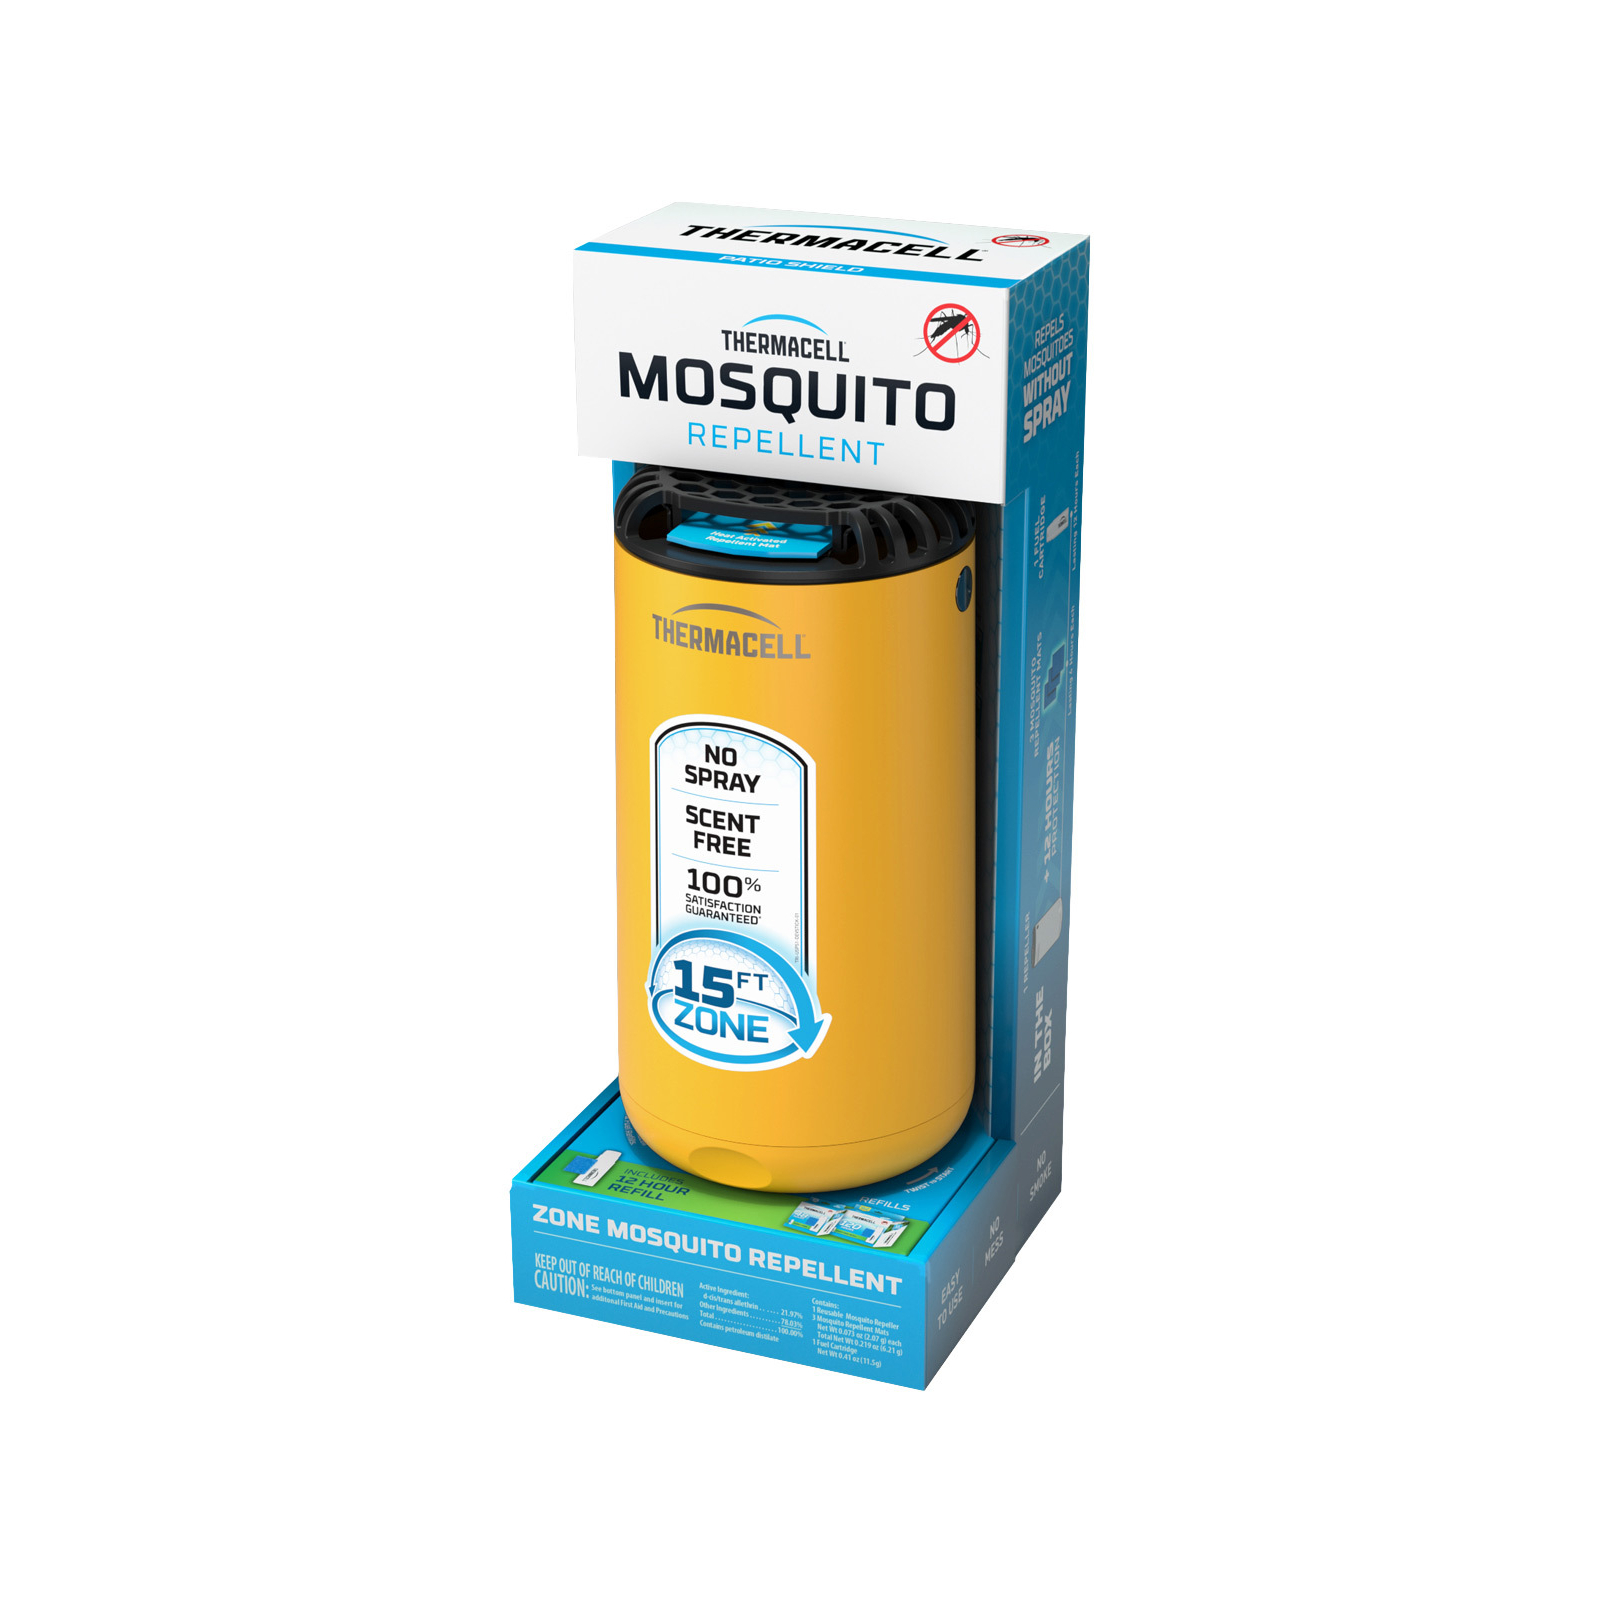 Фумигатор Тhermacell Patio Shield Mosquito Repeller MR-PS Linen (1200.05.92) изображение 5